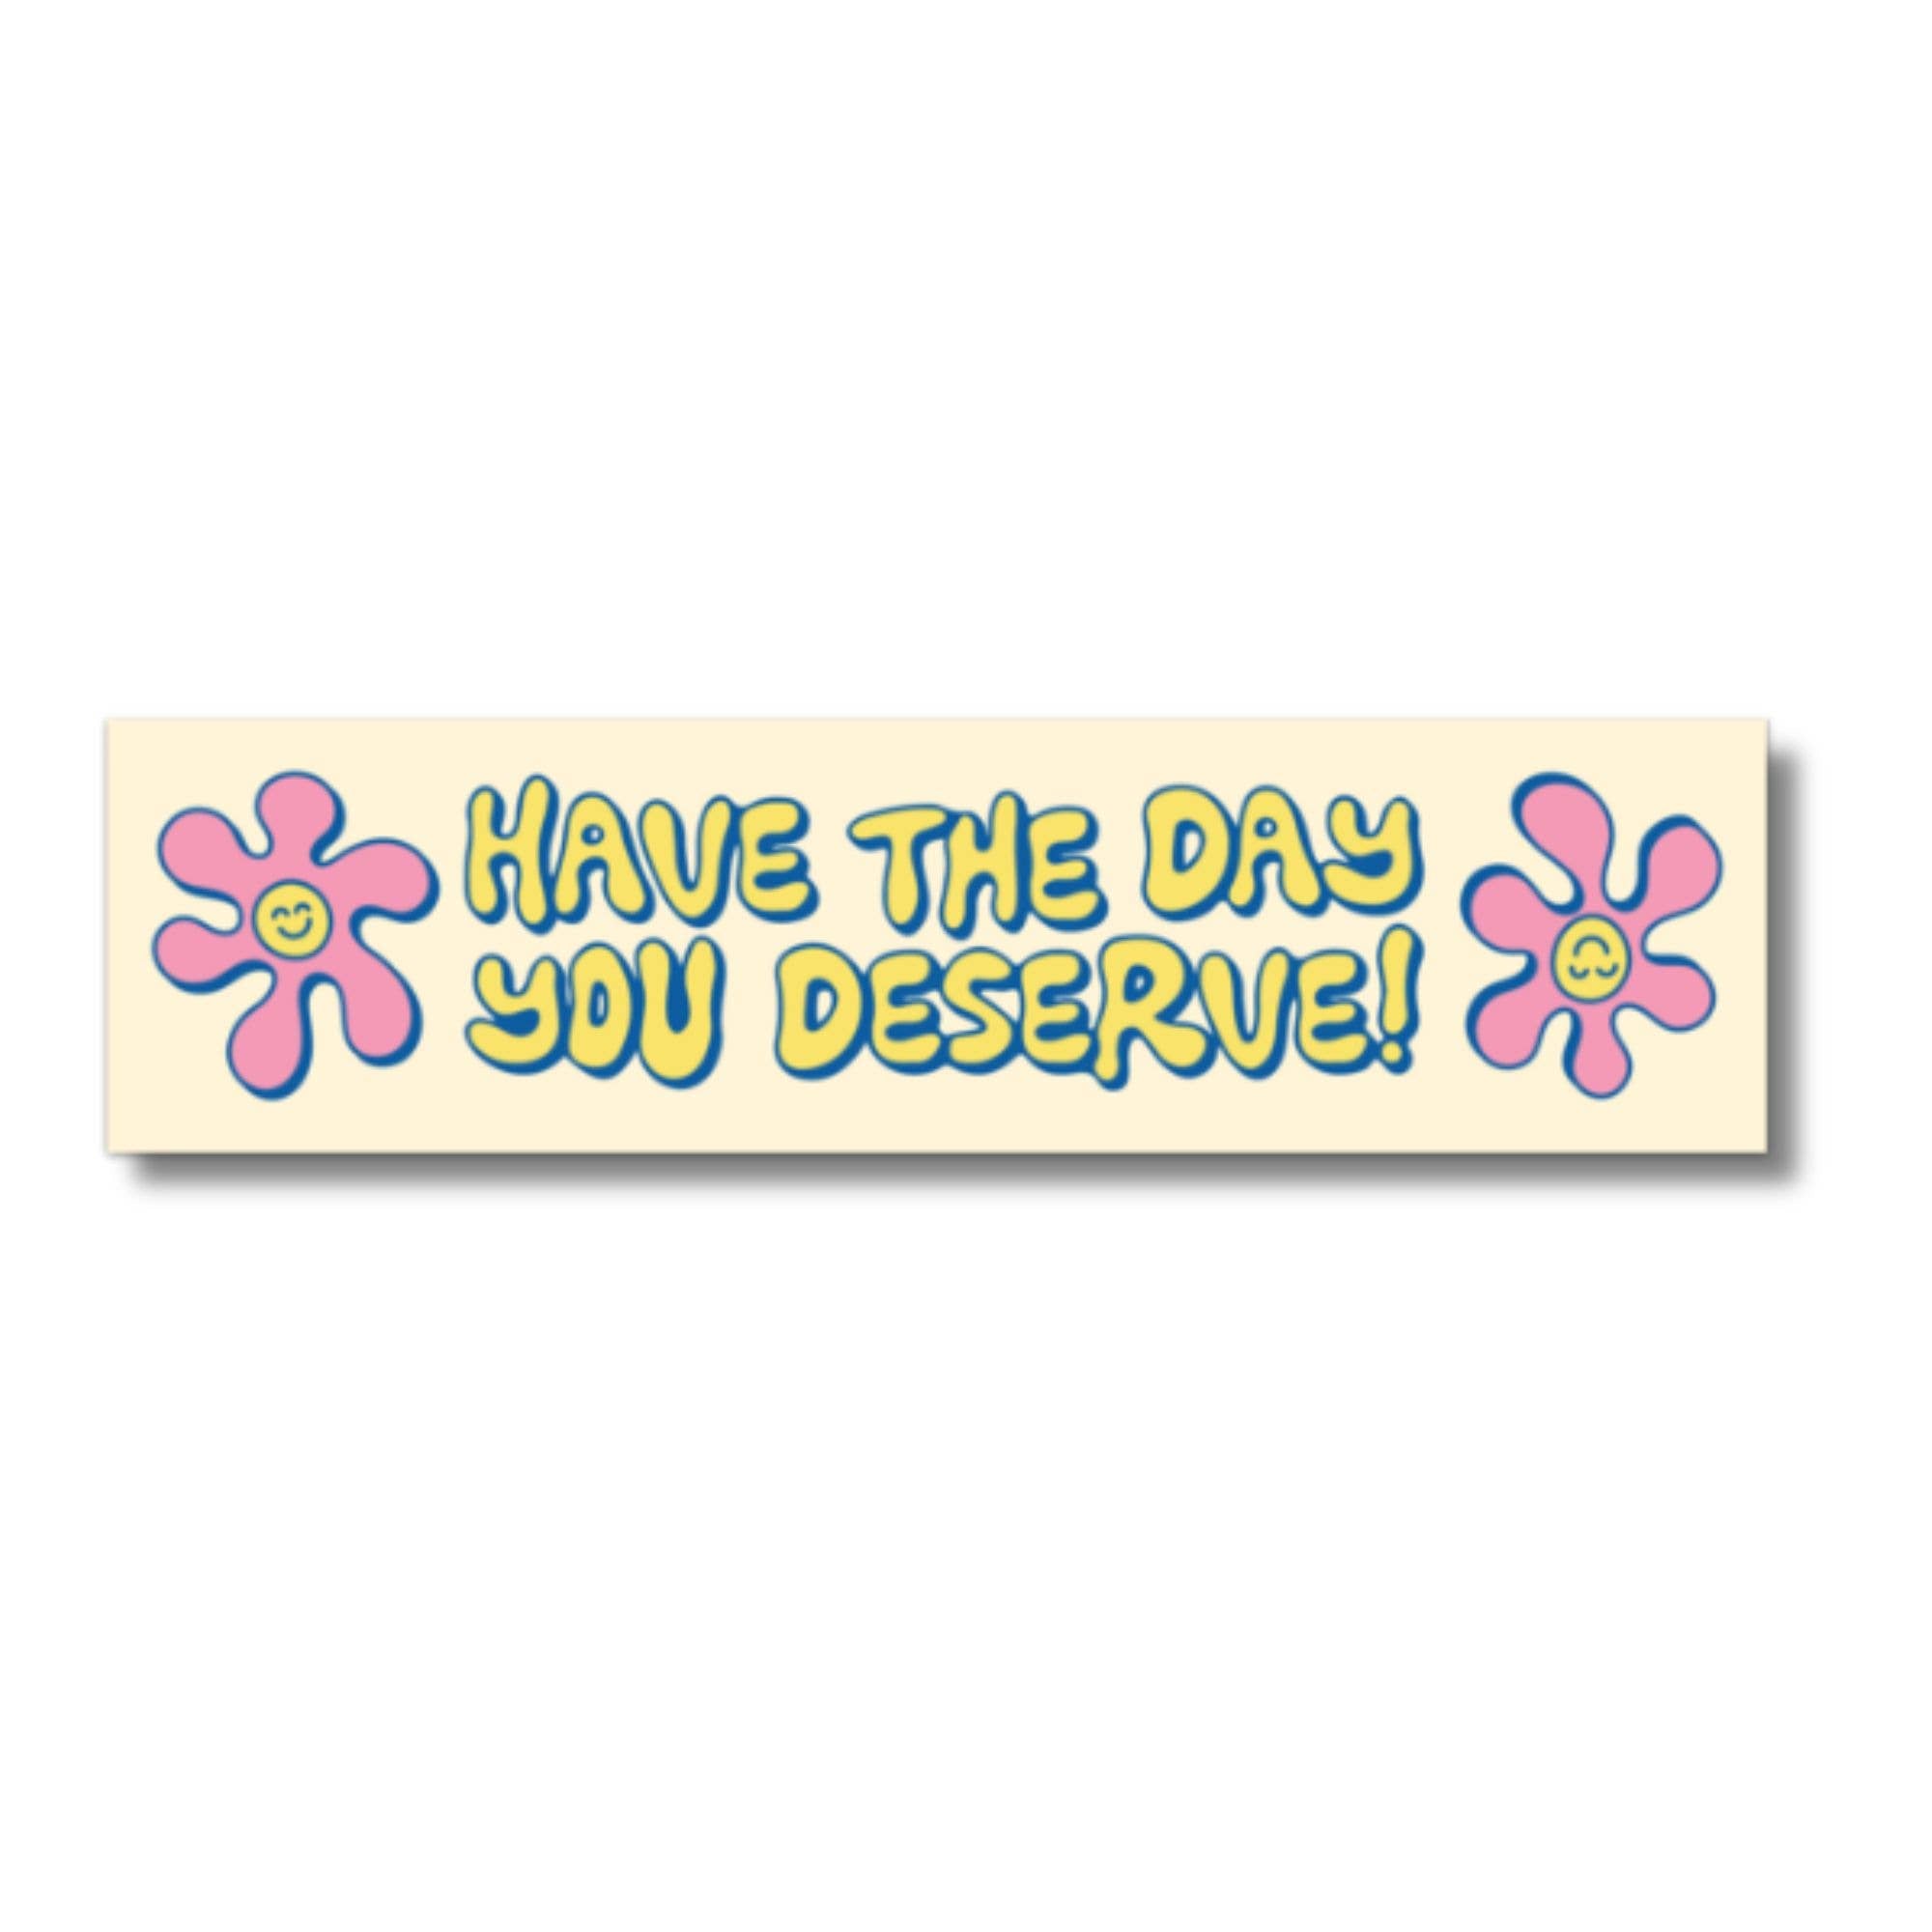 Have The Day You Deserve Bumper Sticker (funny, sarcastic)